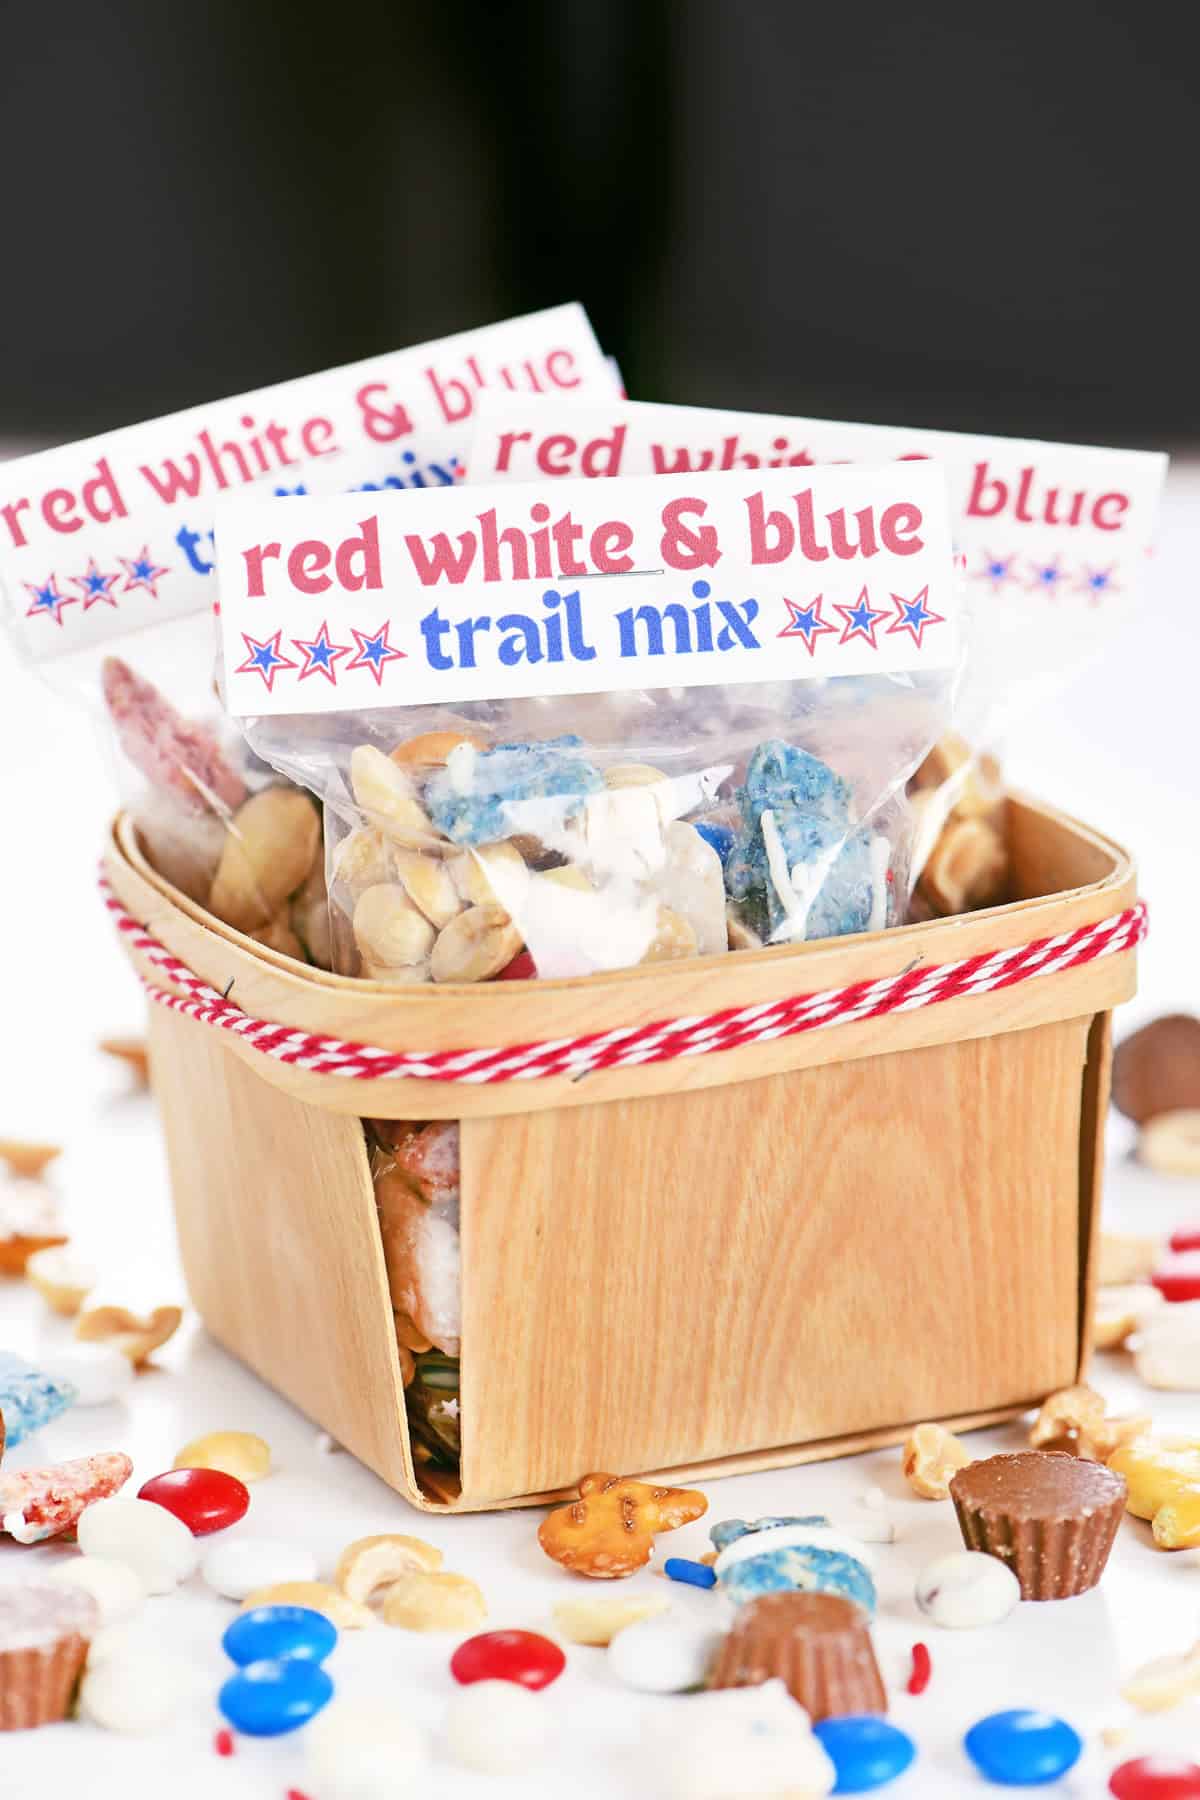 Red white and blue trail mix in labeled bags in a wooden berry basket.